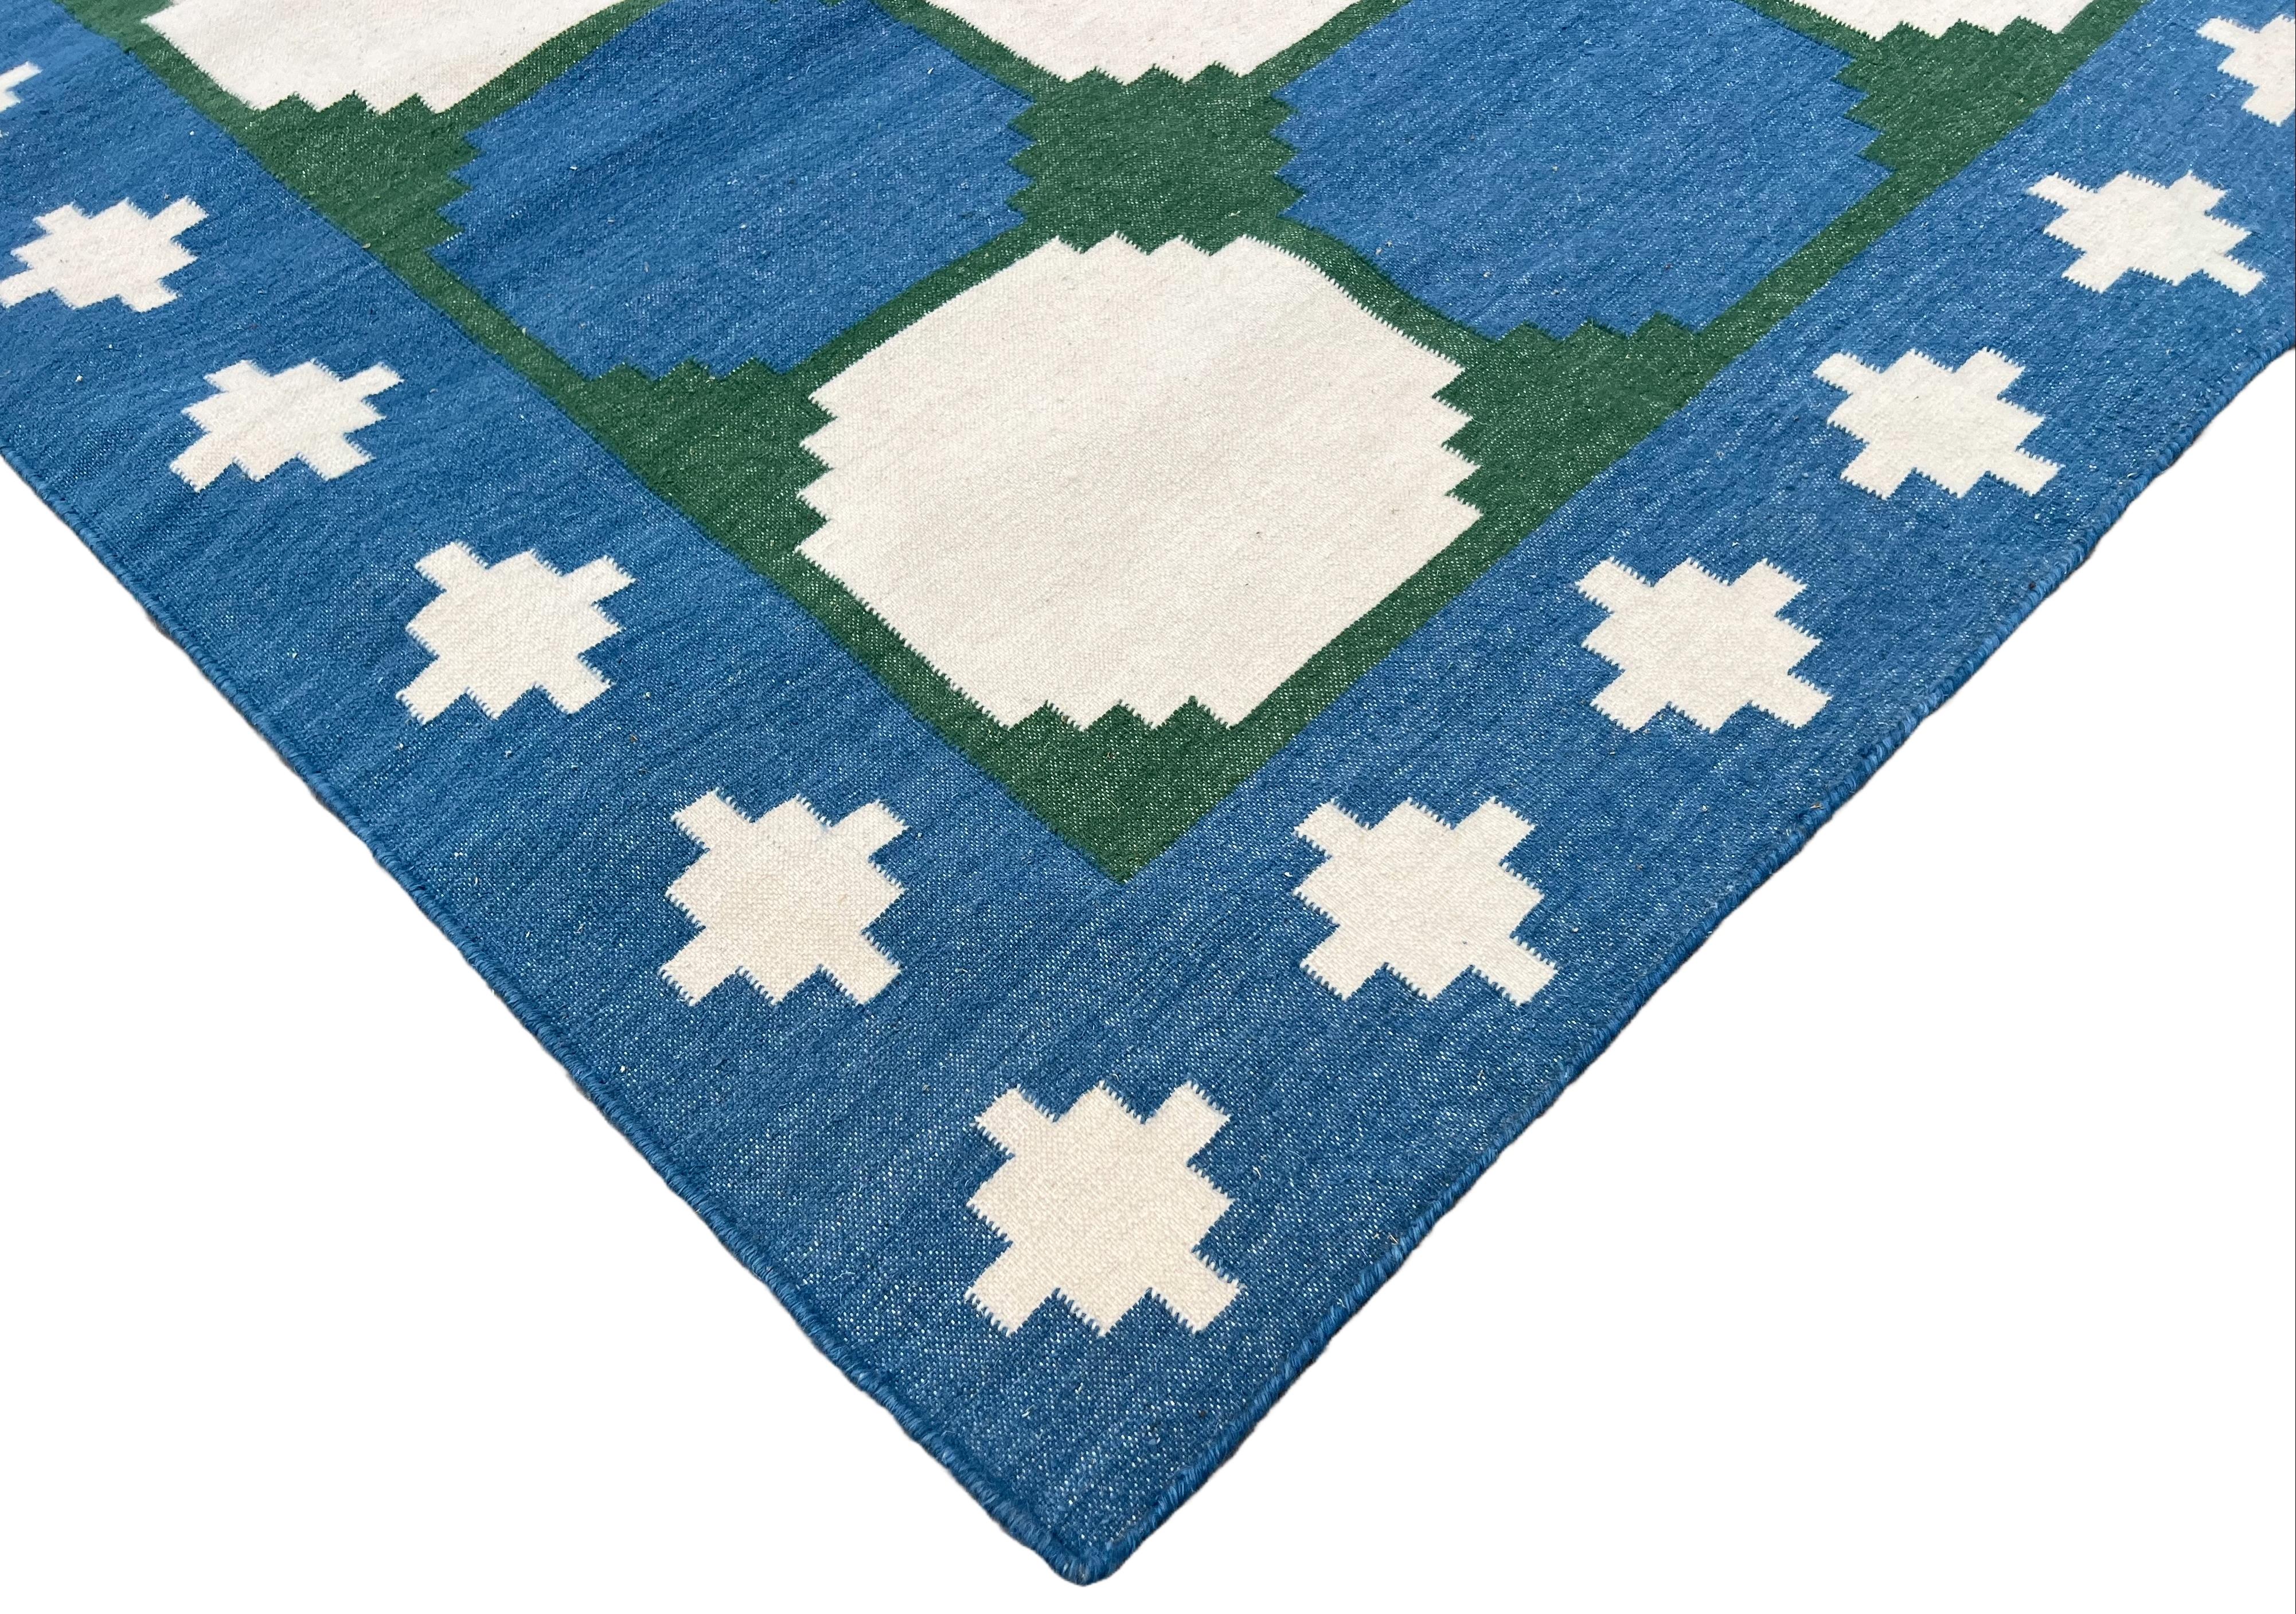 Handmade Woolen Area Flat Weave Rug, 8x10 Blue And Green Tile Patterned Dhurrie For Sale 3